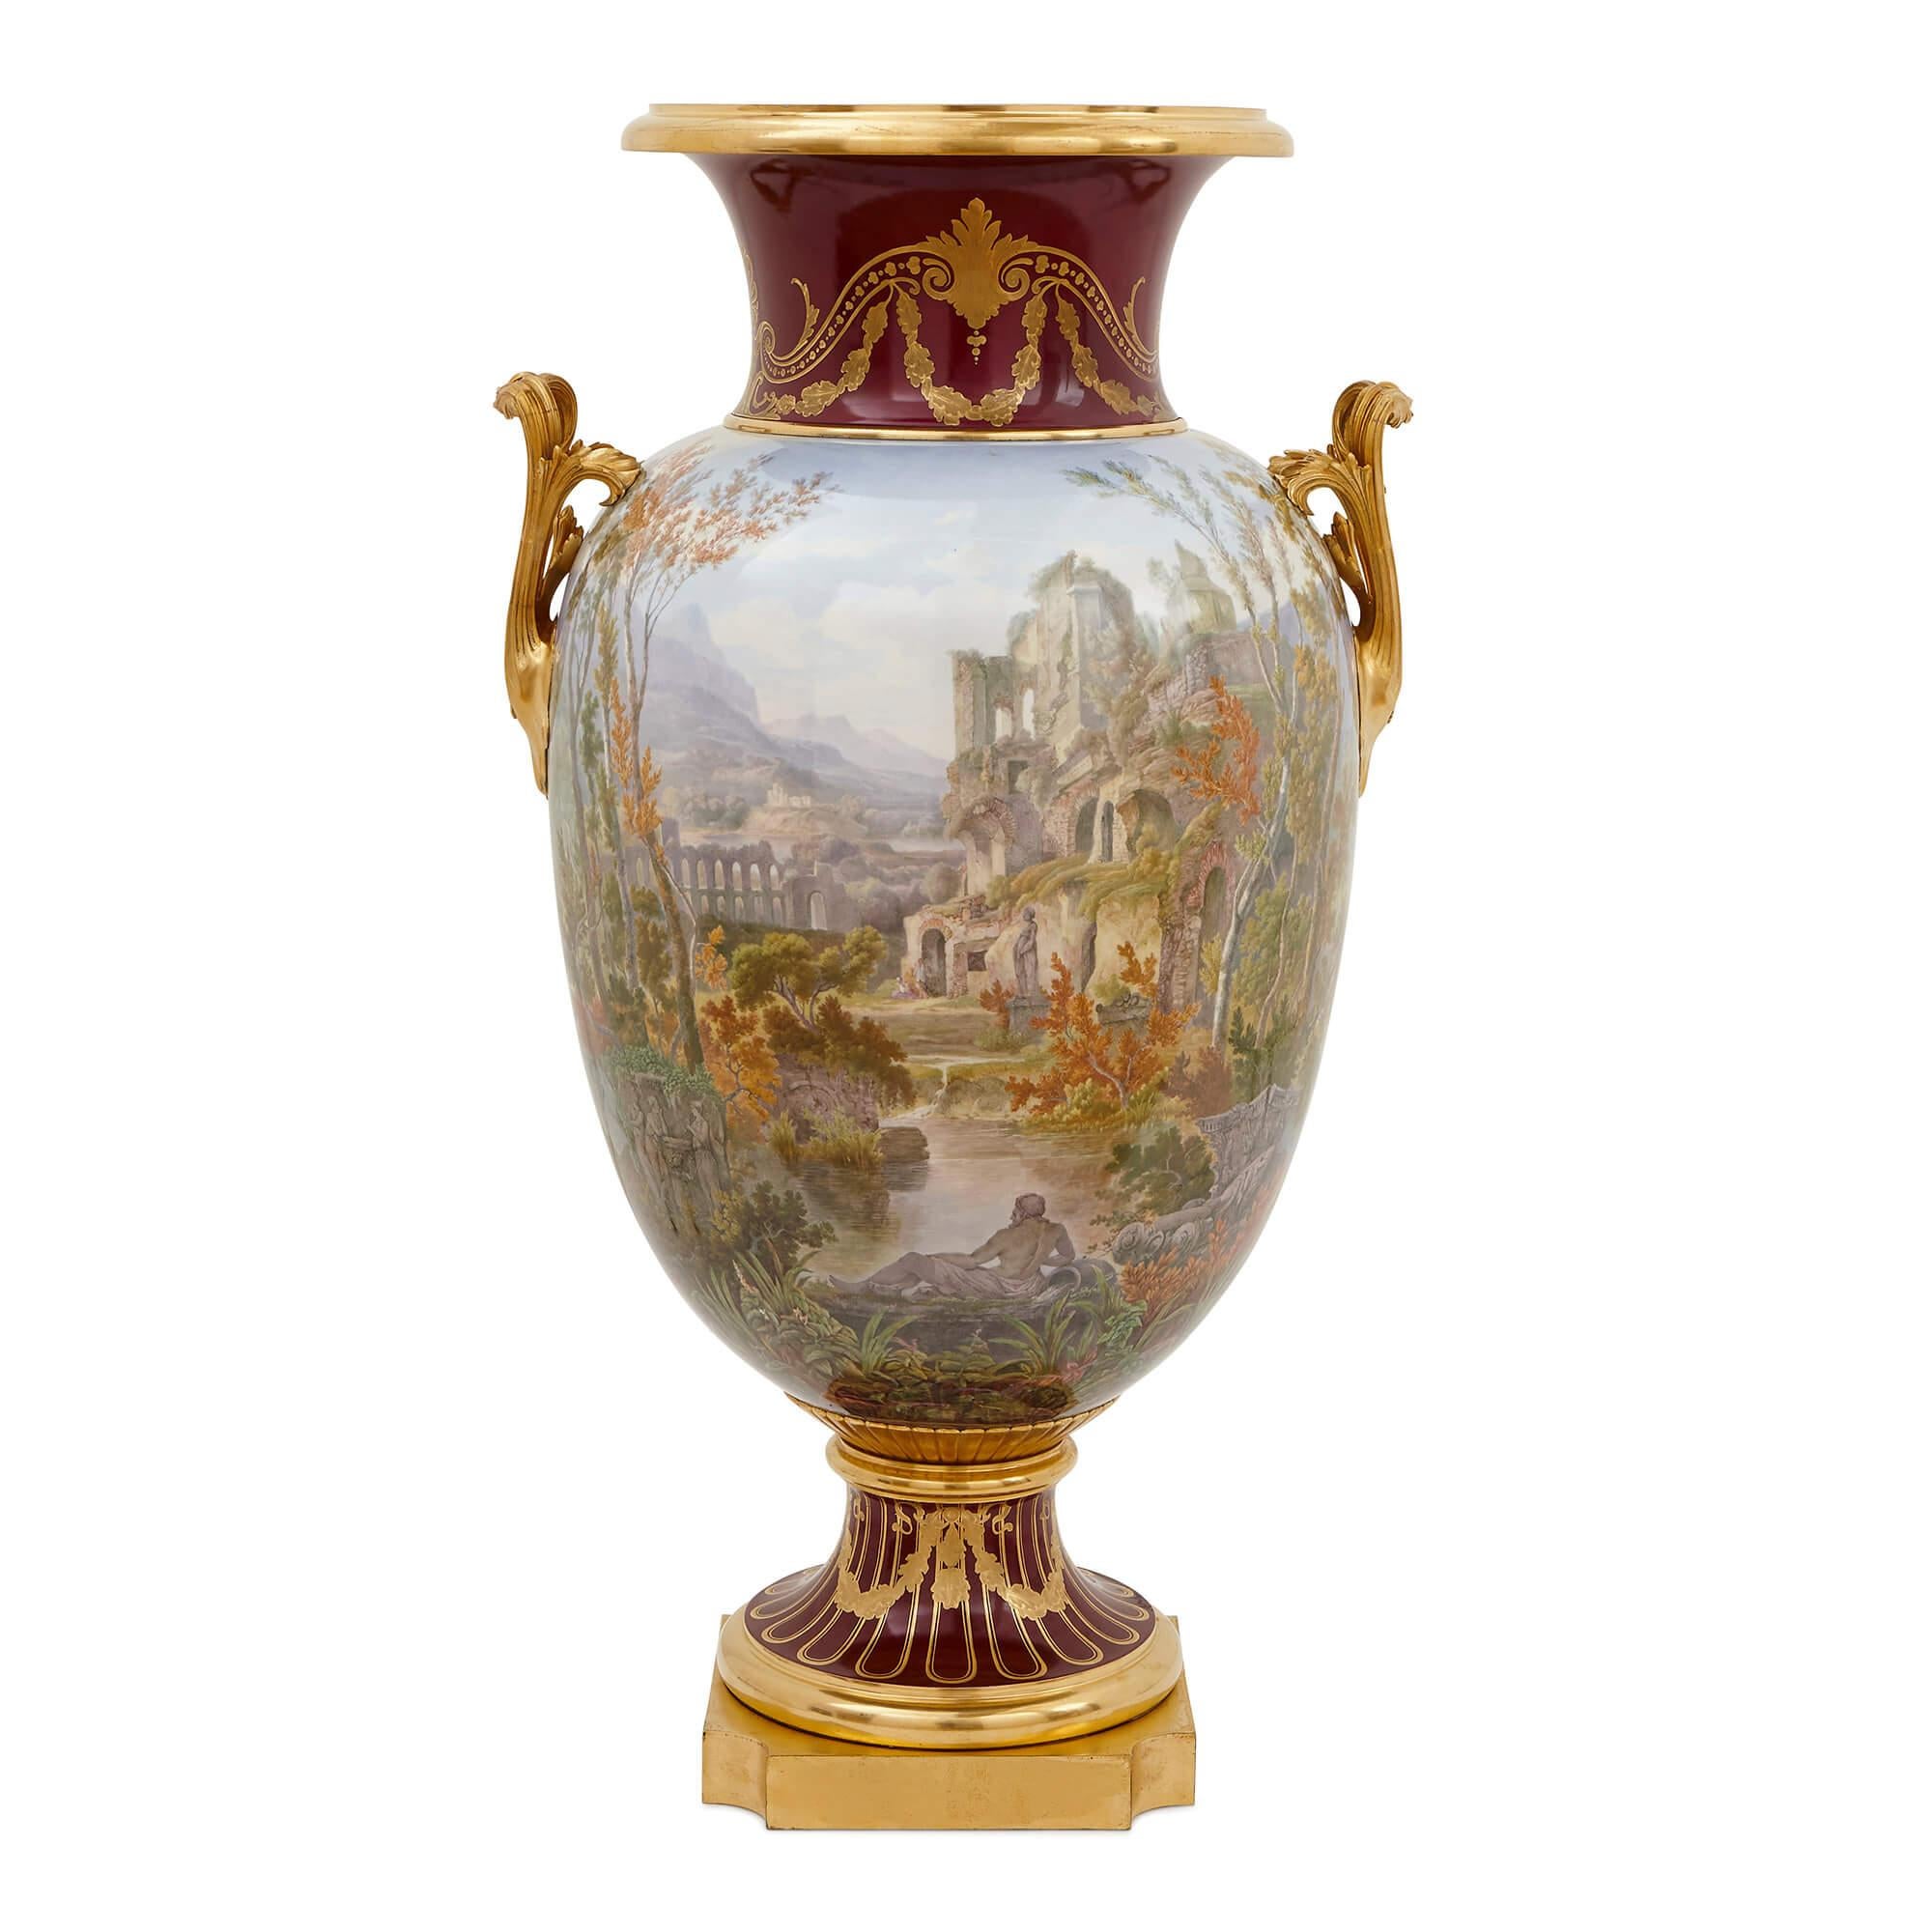 These vases display the kind of fine detailing and gilding that the Sevres Porcelain Manufactory was renowned for in the 18th and 19th Centuries. These large vases - each measuring 93cm (37 inches) in height - were produced at Sevres during the